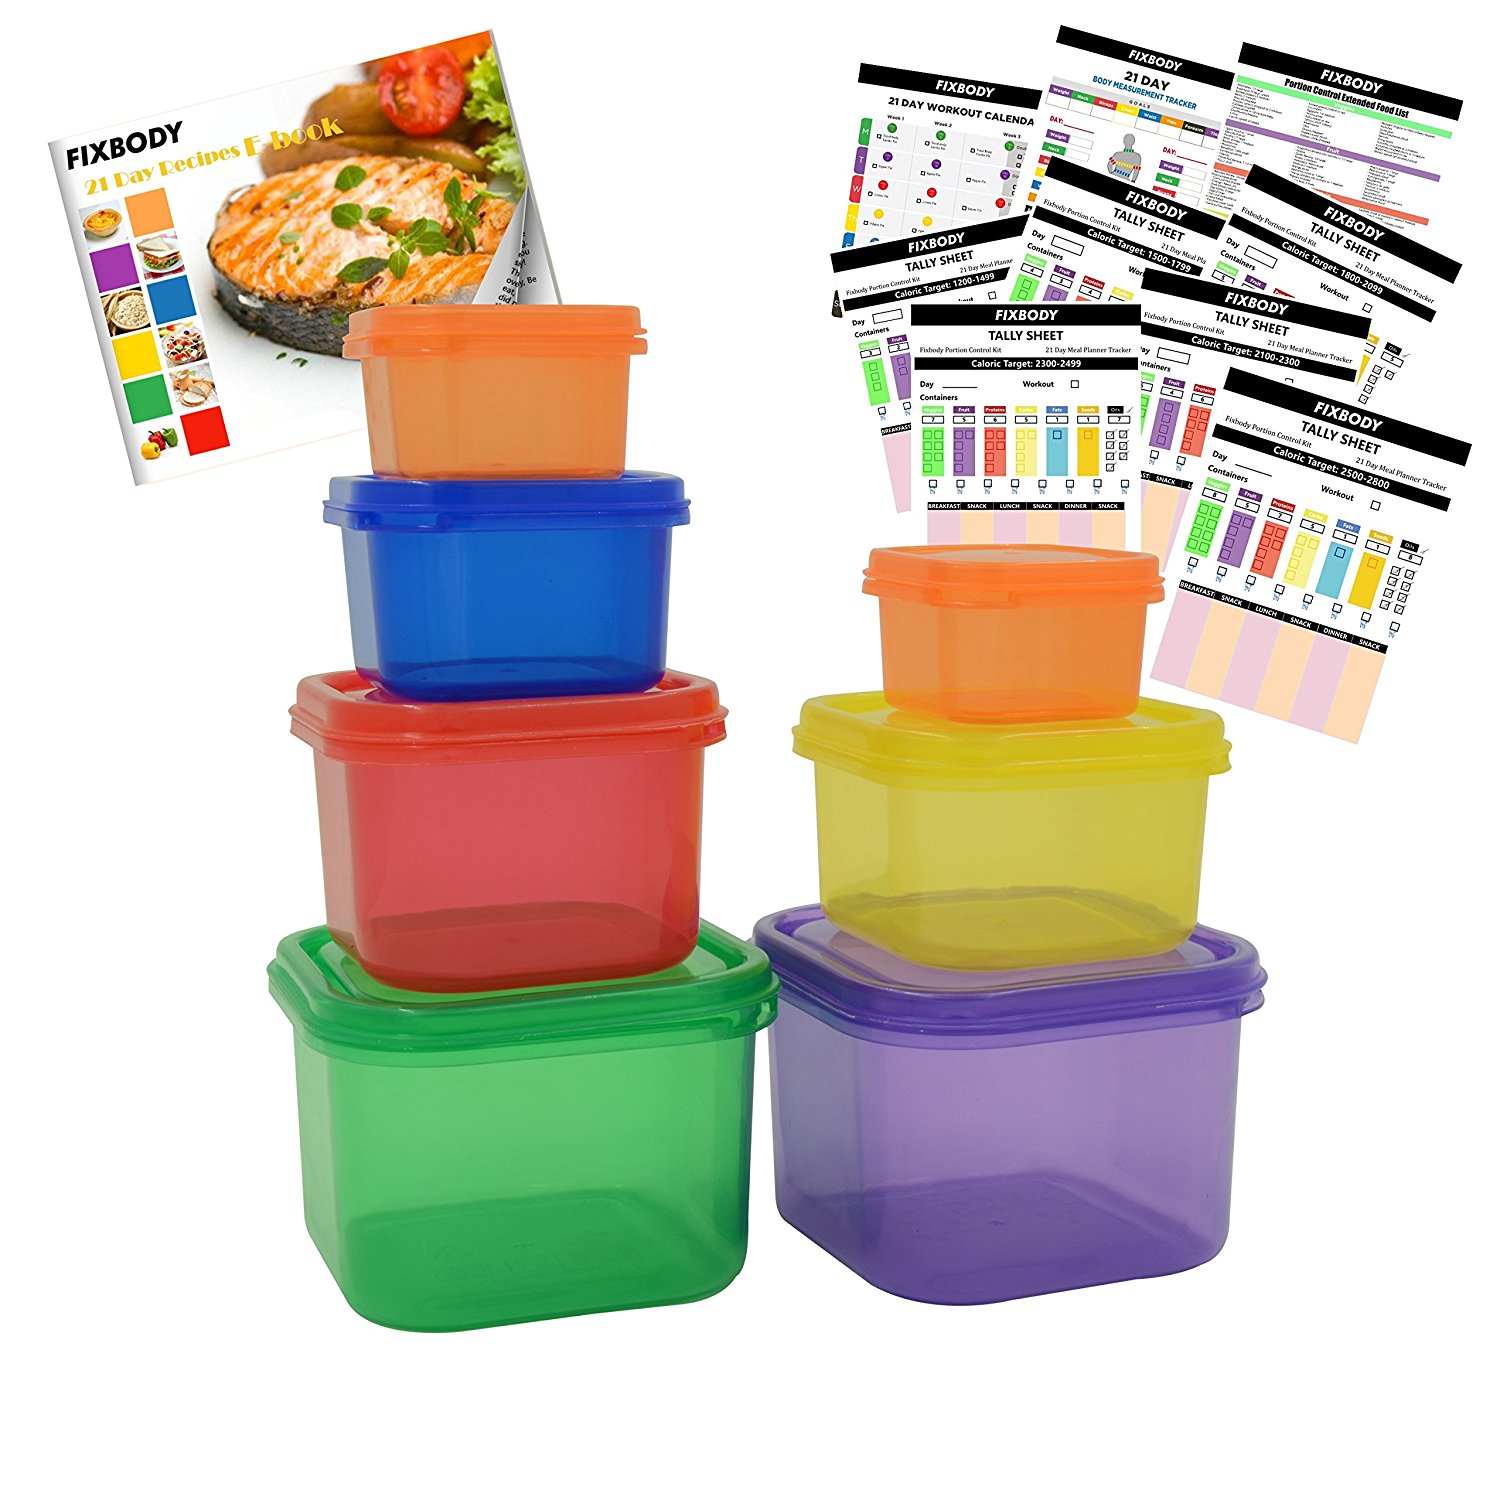 FIXBODY 7 Piece Portion Control Containers Kit